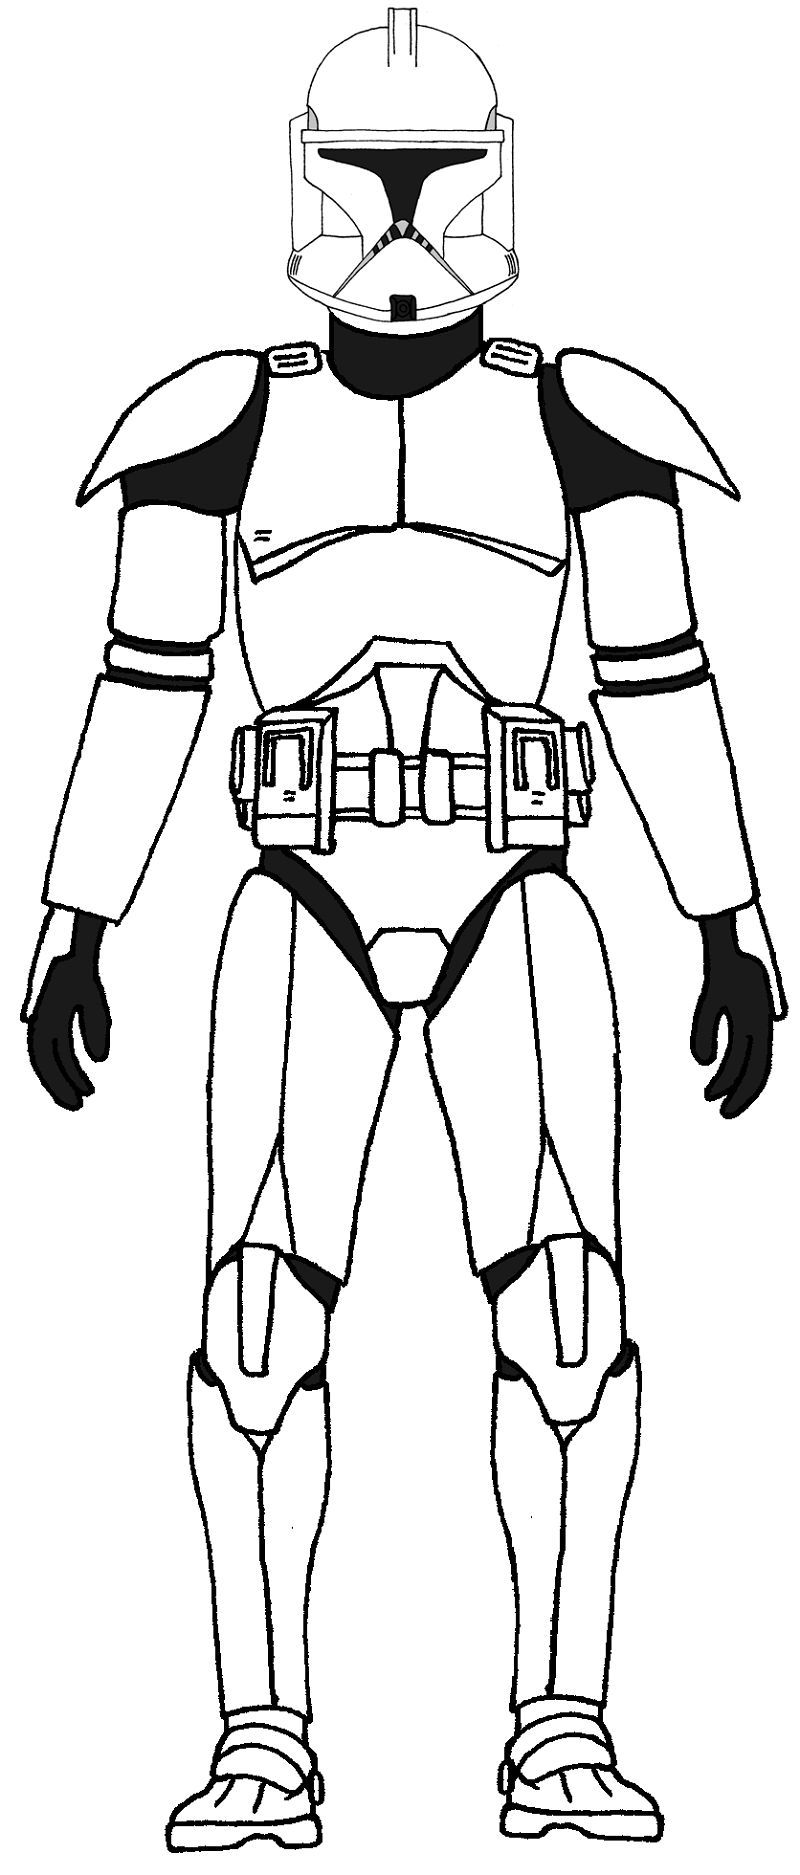 Clone Trooper Coloring Pages | Educative Printable | Star wars clone wars,  Star wars pictures, Clone trooper